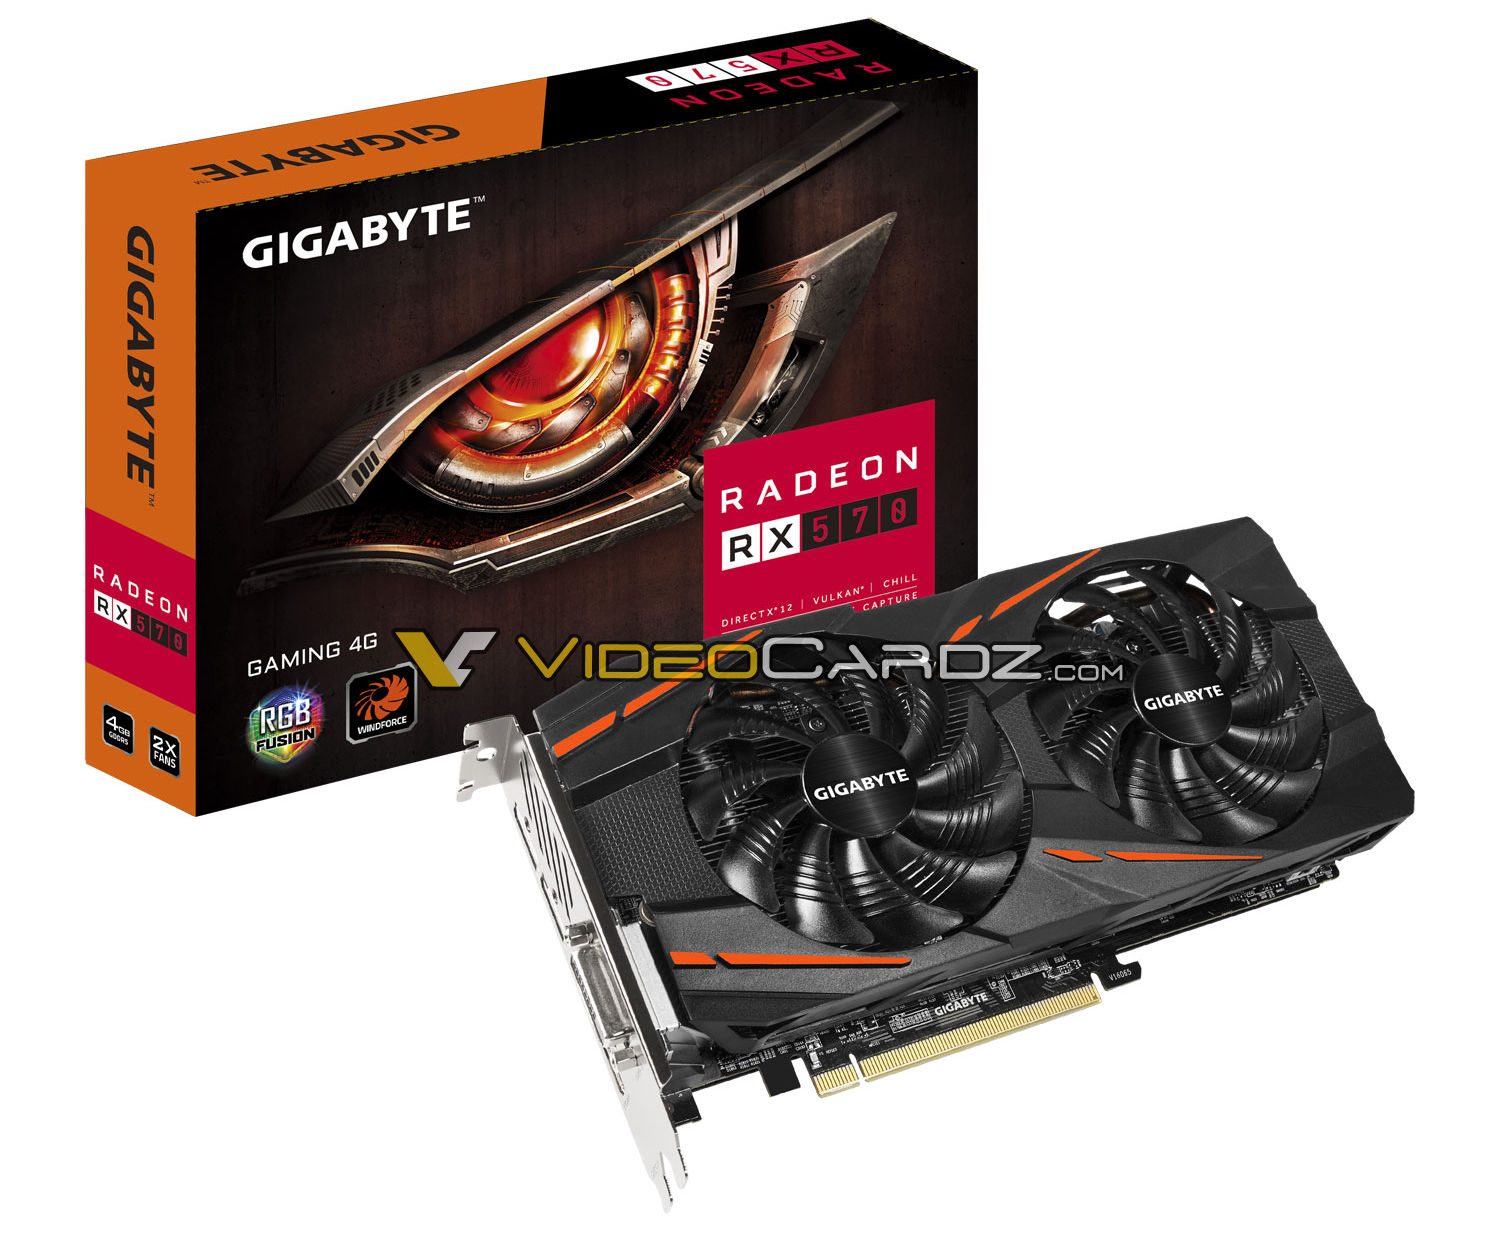 Media asset in full size related to 3dfxzone.it news item entitled as follows: Fotogallery di 9 video card GIGABYTE Radeon RX 500 AORUS e GAMING | Image Name: news26126_GIGABYTE-AORUS-Radeon-RX-500_7.jpg